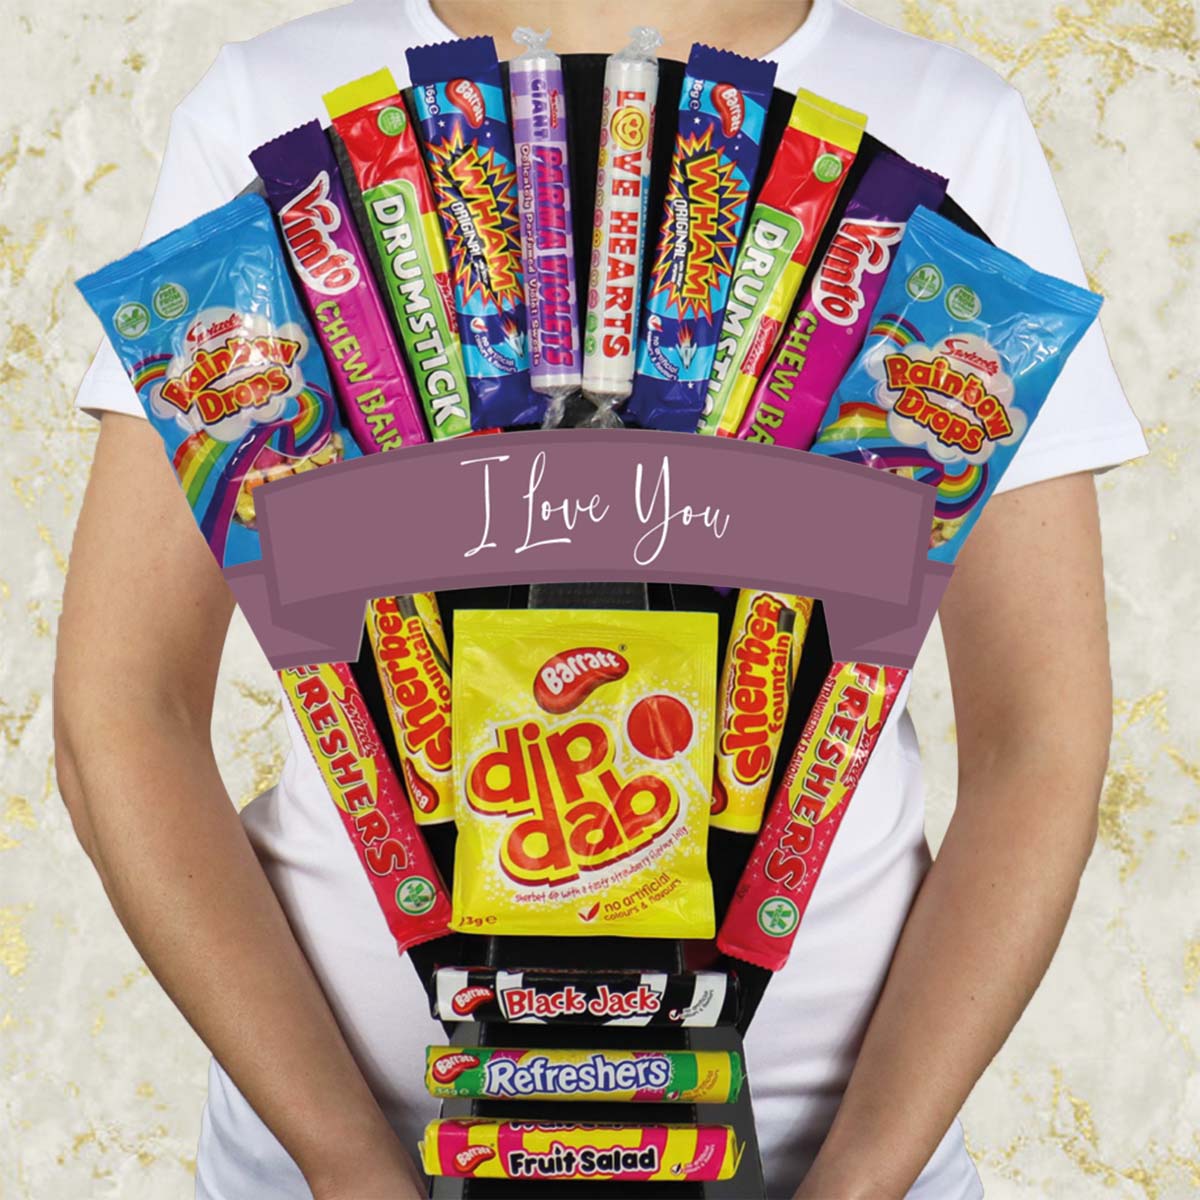 The XL Retro Sweets I Love You Bouquet with Dip Dabs, Black Jack, Drumsticks and More - Gift Hamper Box by HamperWell